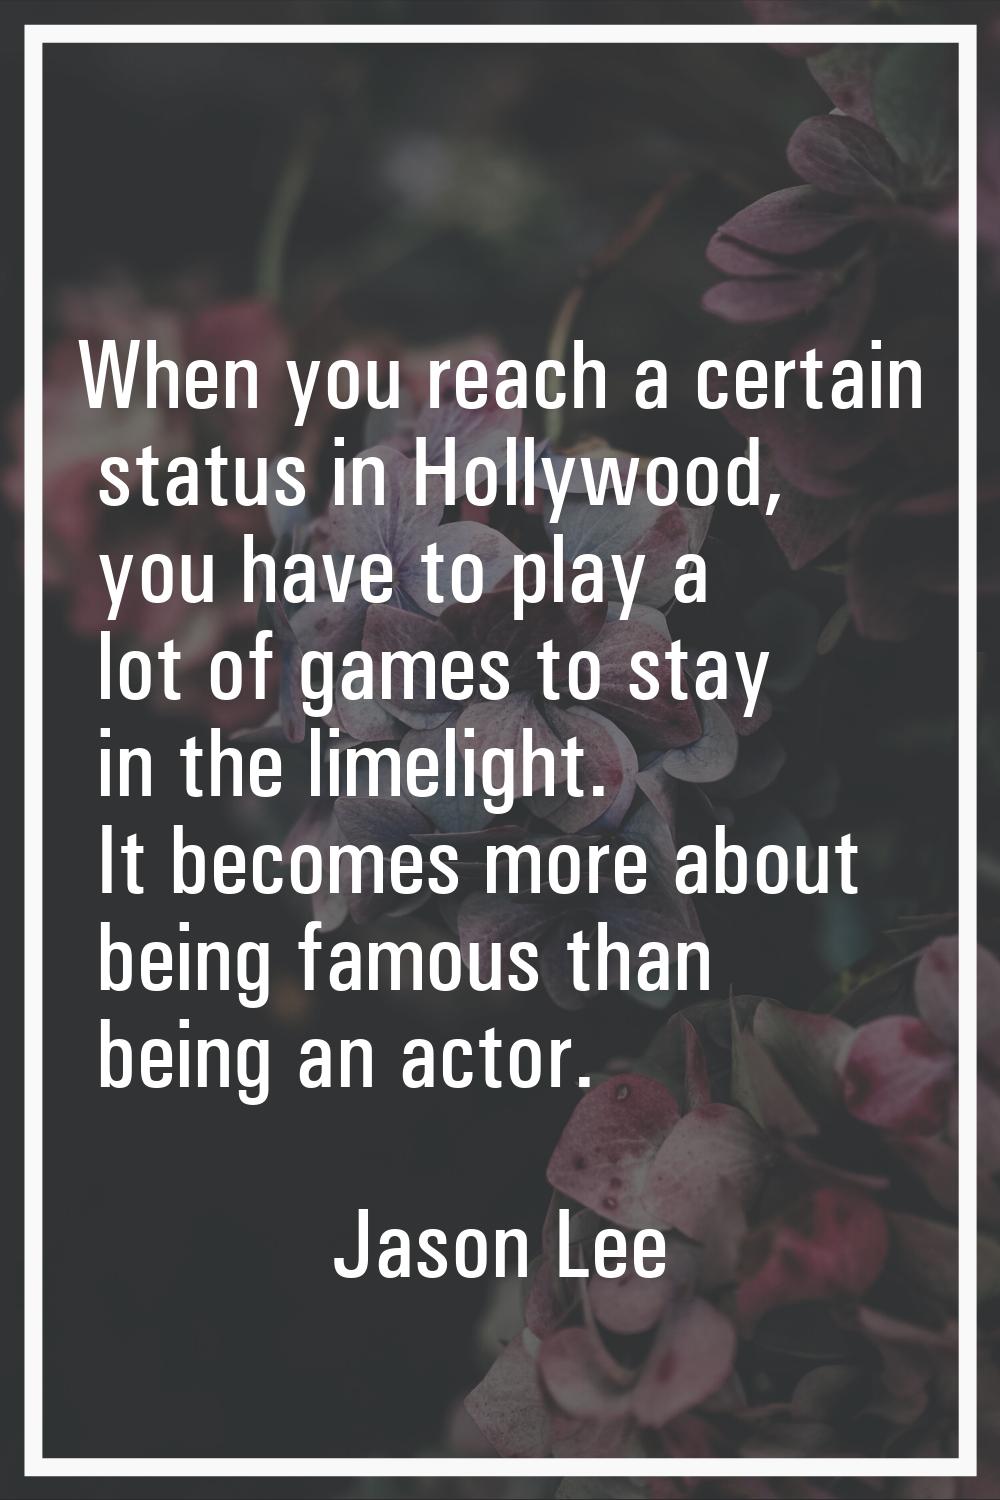 When you reach a certain status in Hollywood, you have to play a lot of games to stay in the limeli